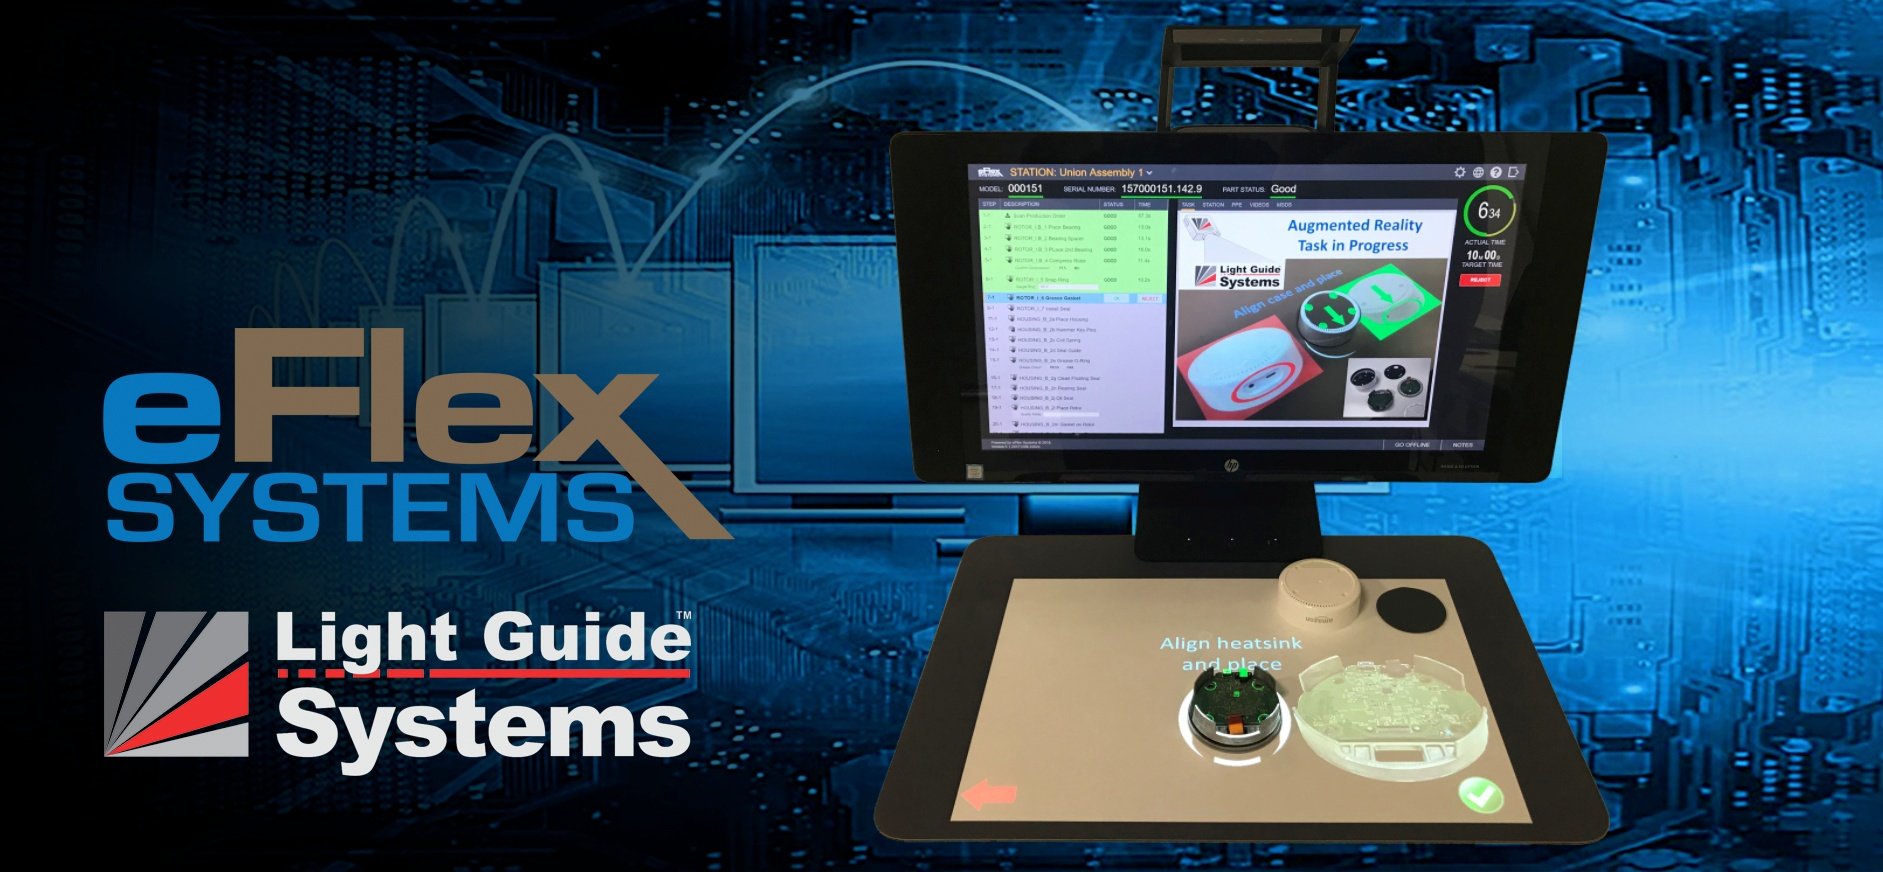 eFlex partners with Light Guide Systems, adding augmented reality (AR) capabilities to JEM — work instruction software